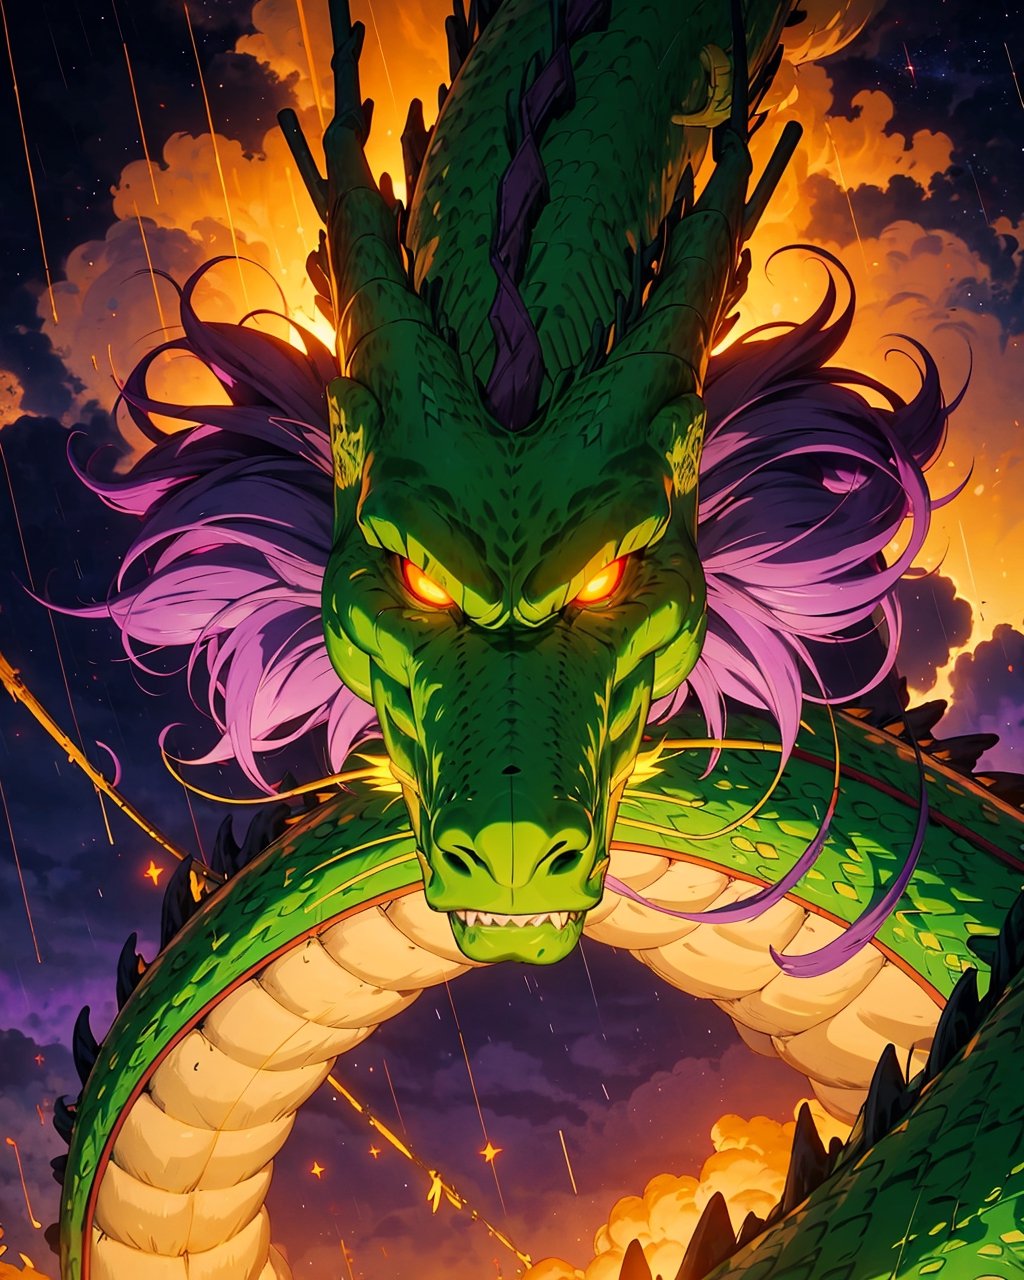 wyrm,shenlong, oriental dragon, glowing eyes, shiny, galaxy, sharps theet, long whiskers, purple hair, floating debris, looking_at_viewer, asymetric, intrincate details, realistic, ,r1ge, close up, yellow sky, yellos clouds, flying, raining